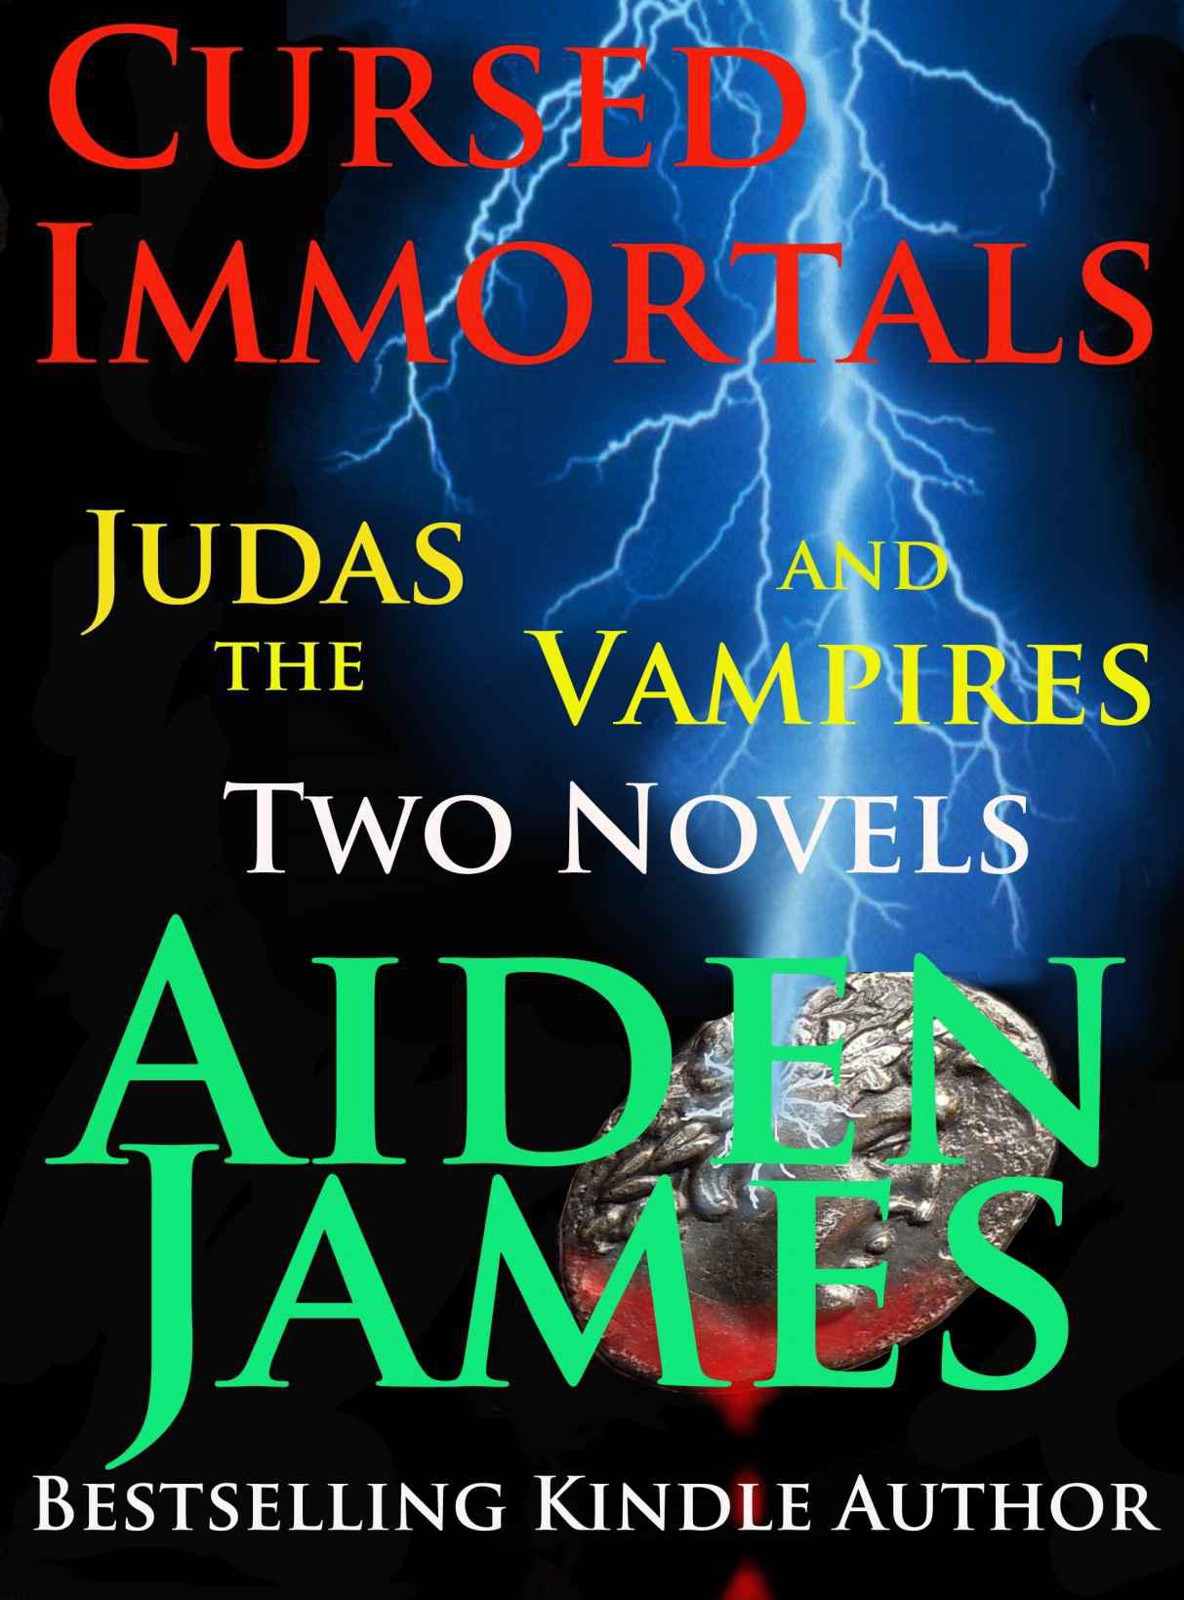 Judas and the Vampires by Aiden James